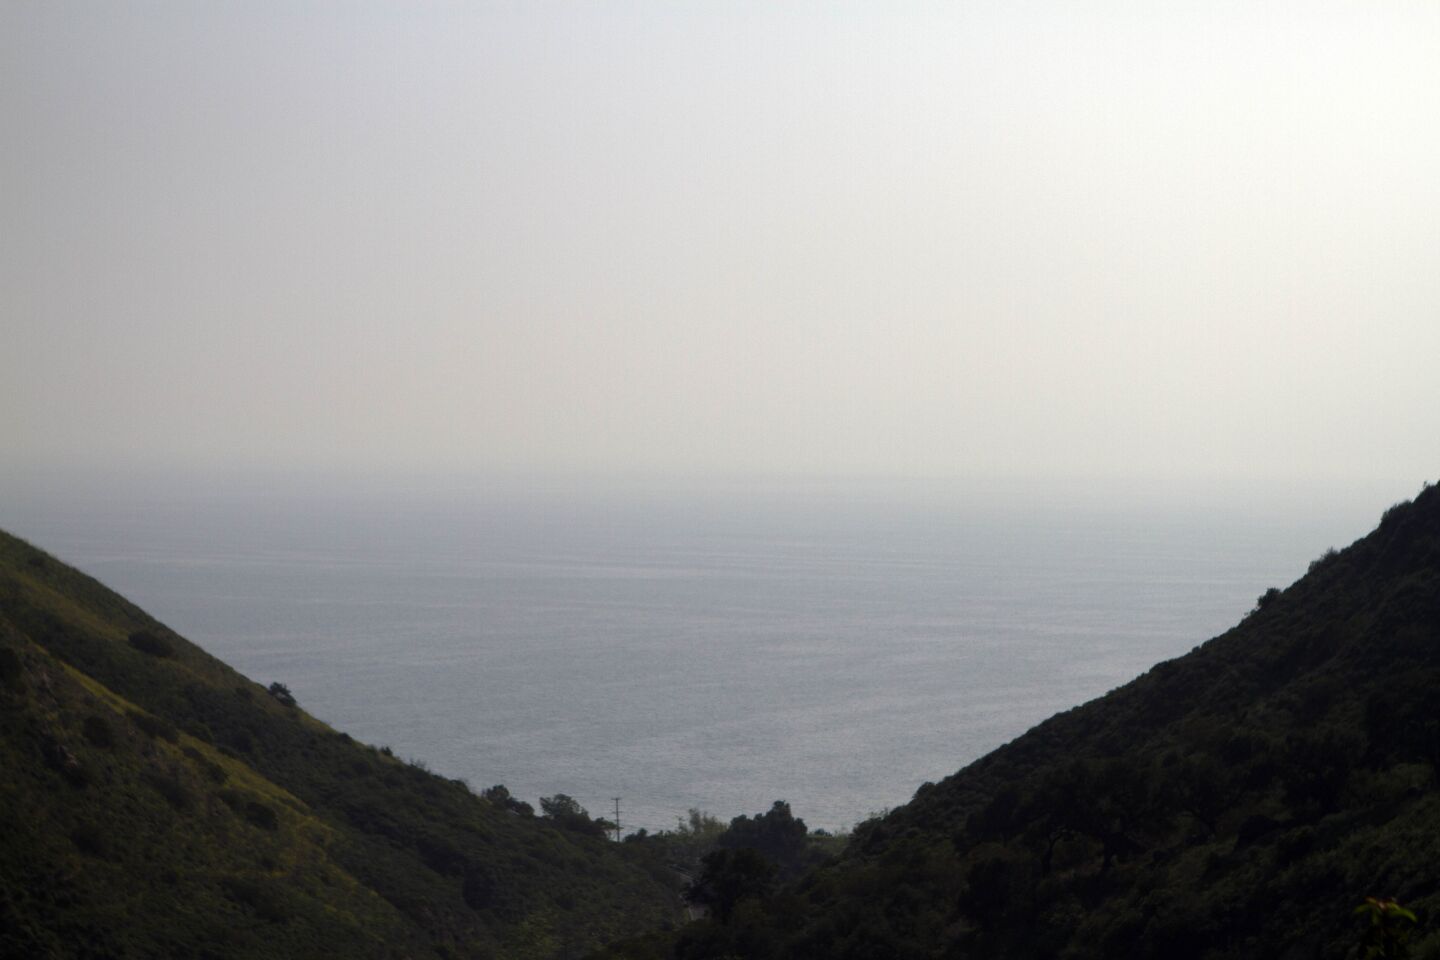 The Rising Sun Trail offers several vistas of the Pacific Ocean.